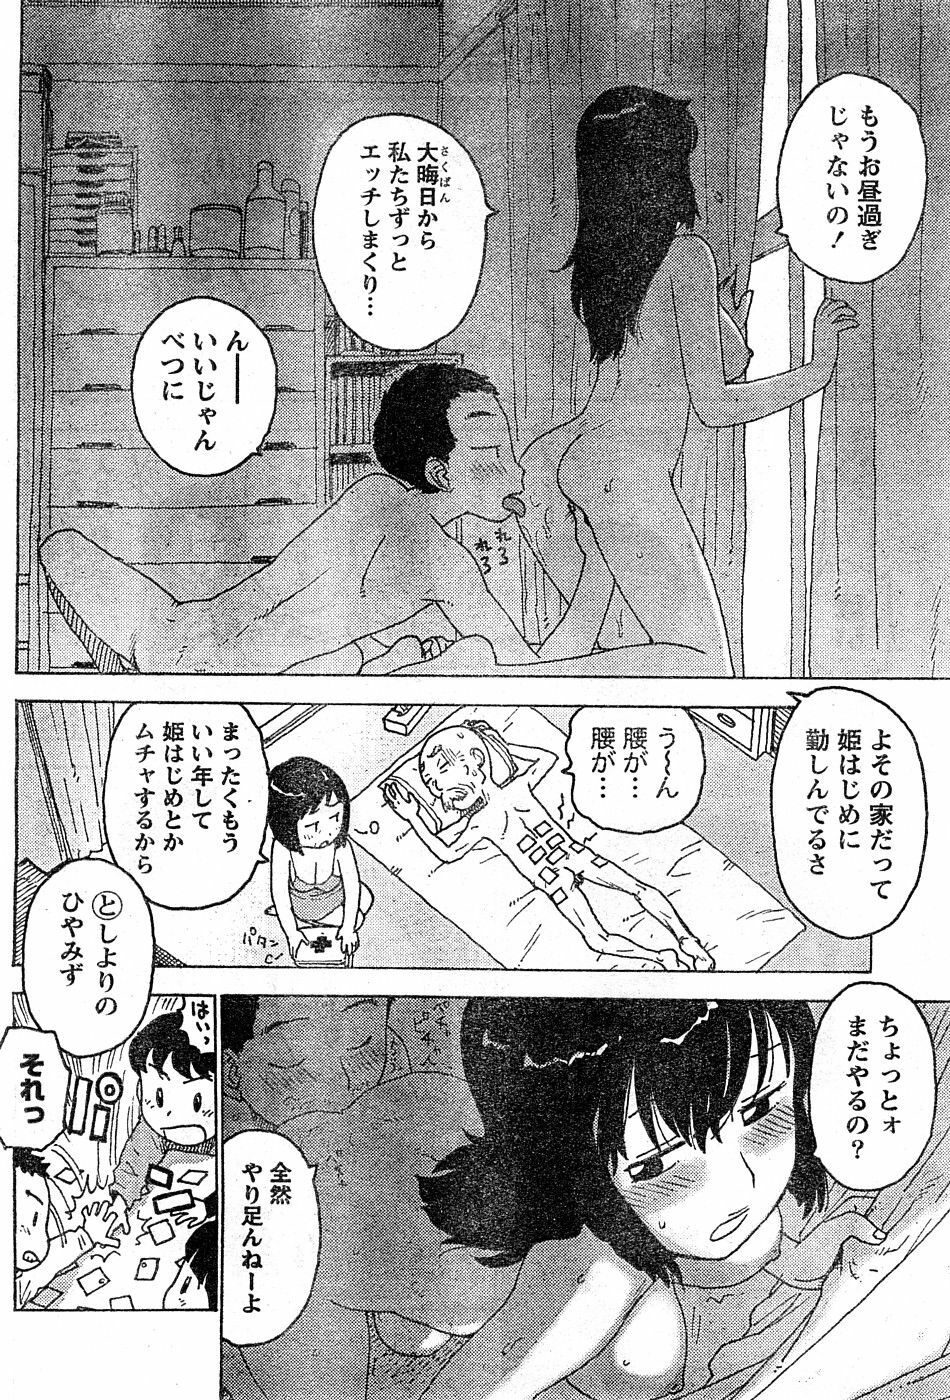 Monthly Vitaman 2009-02 [Incomplete] page 29 full